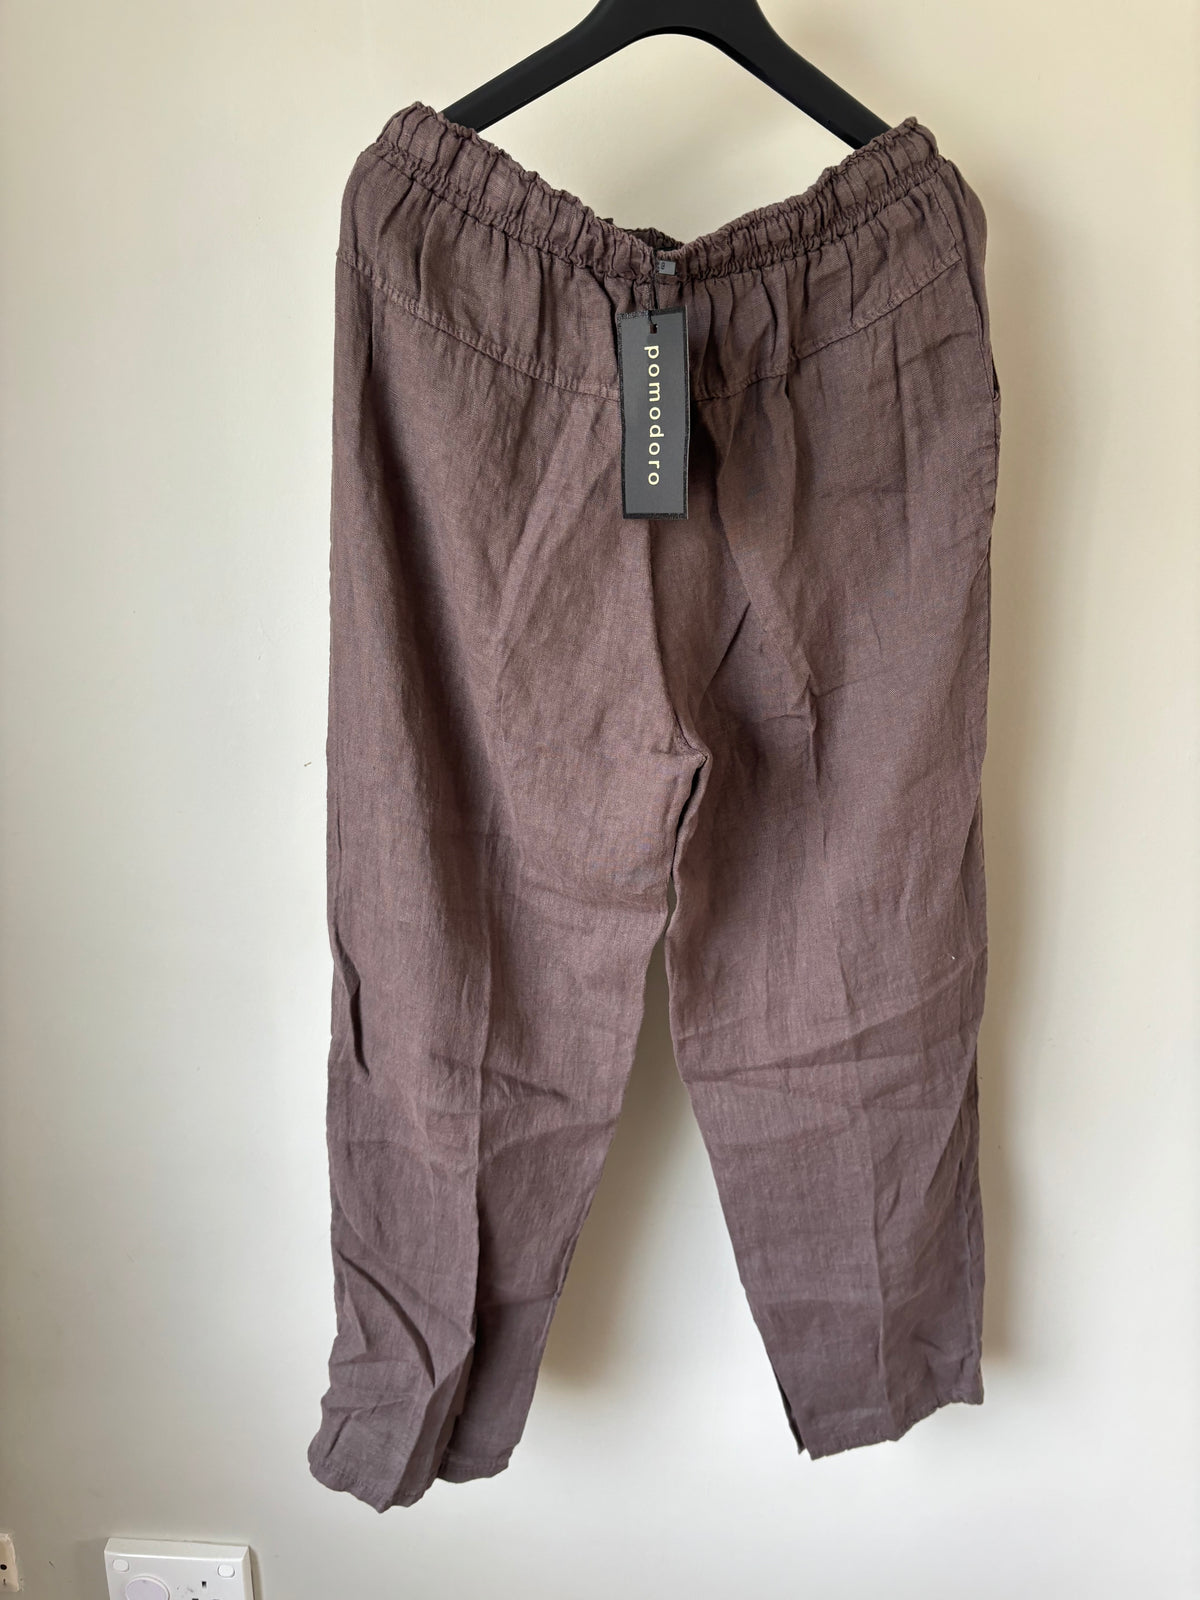 Linen Drawstring Trousers in Chocolate by Pomodoro Size 14